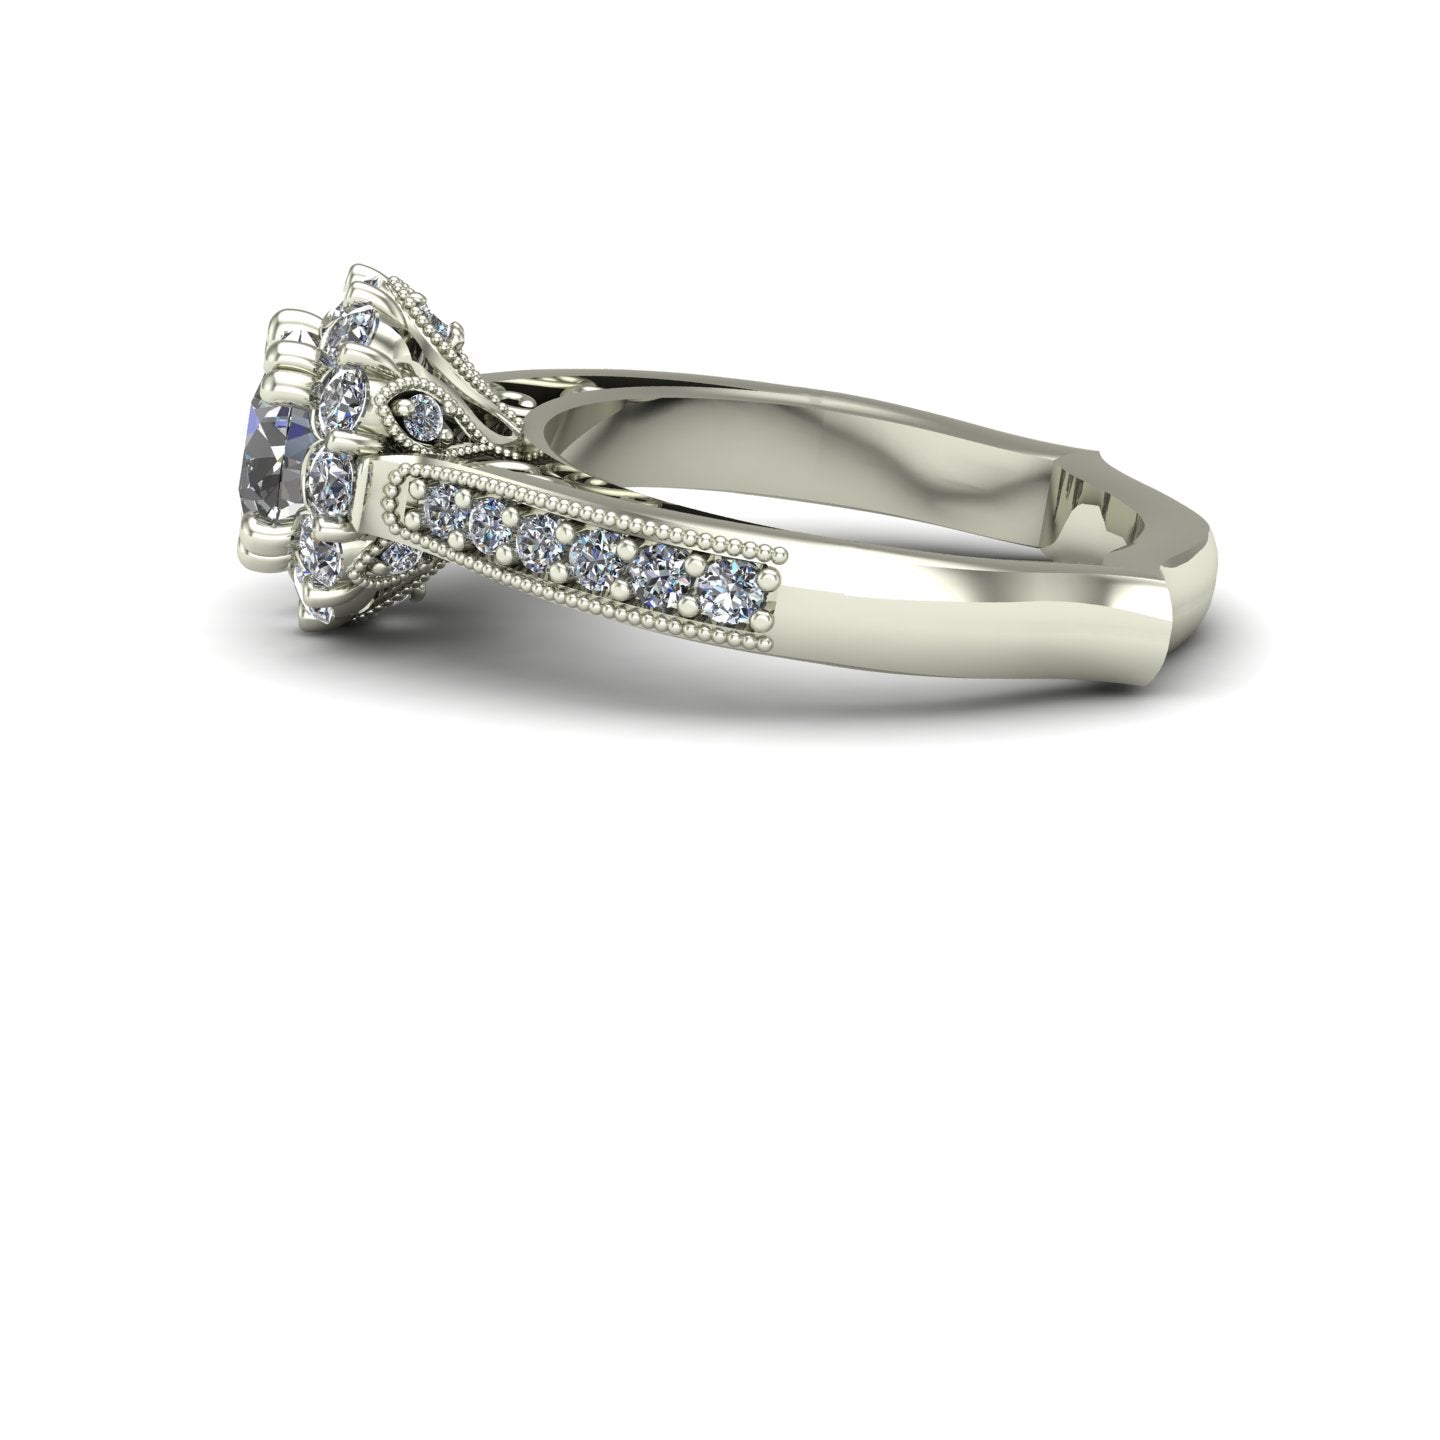 1 ct diamond posey flower halo engagement ring in 14k white gold - Charles Babb Designs - side view